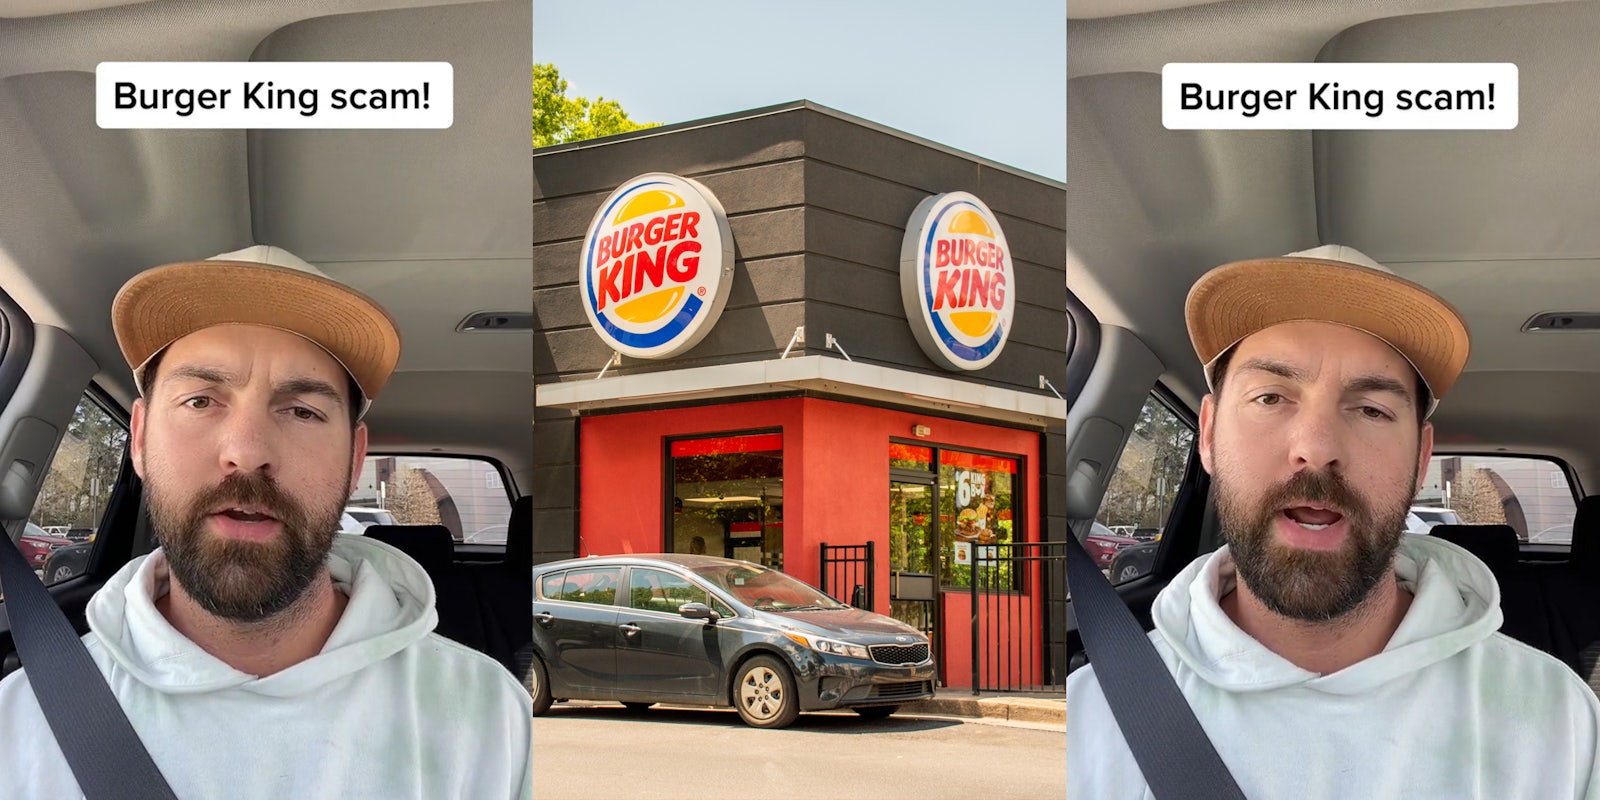 Burger King customer speaking in car with caption 'Burger King Scam!' (l) Burger King building with signs (c) Burger King customer speaking in car with caption 'Burger King Scam!' (r)